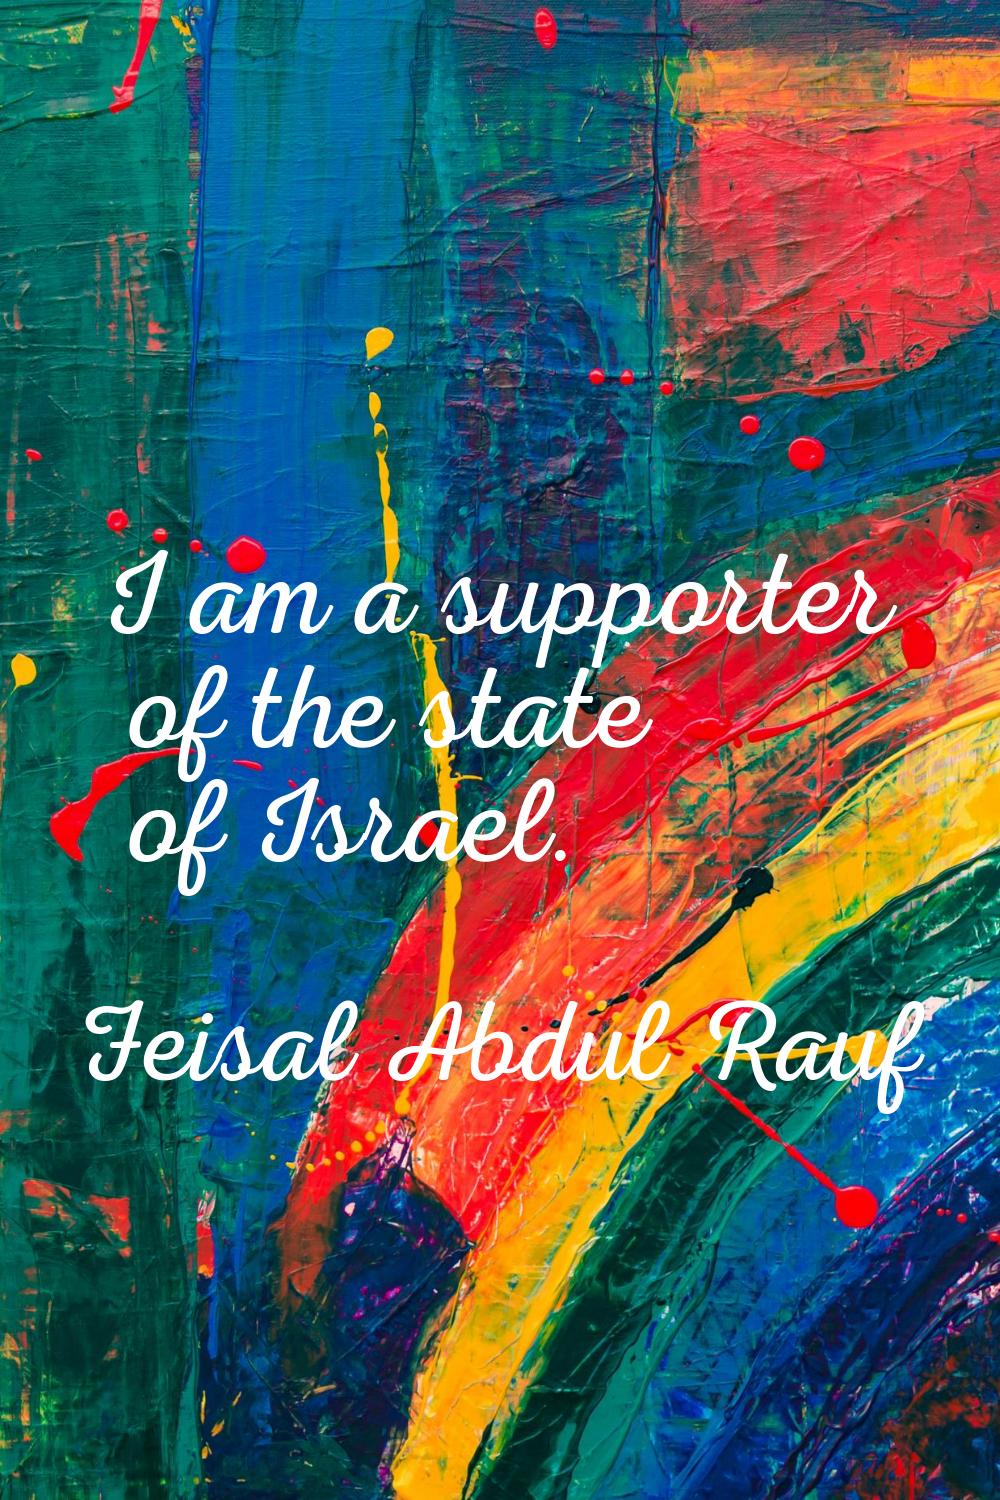 I am a supporter of the state of Israel.